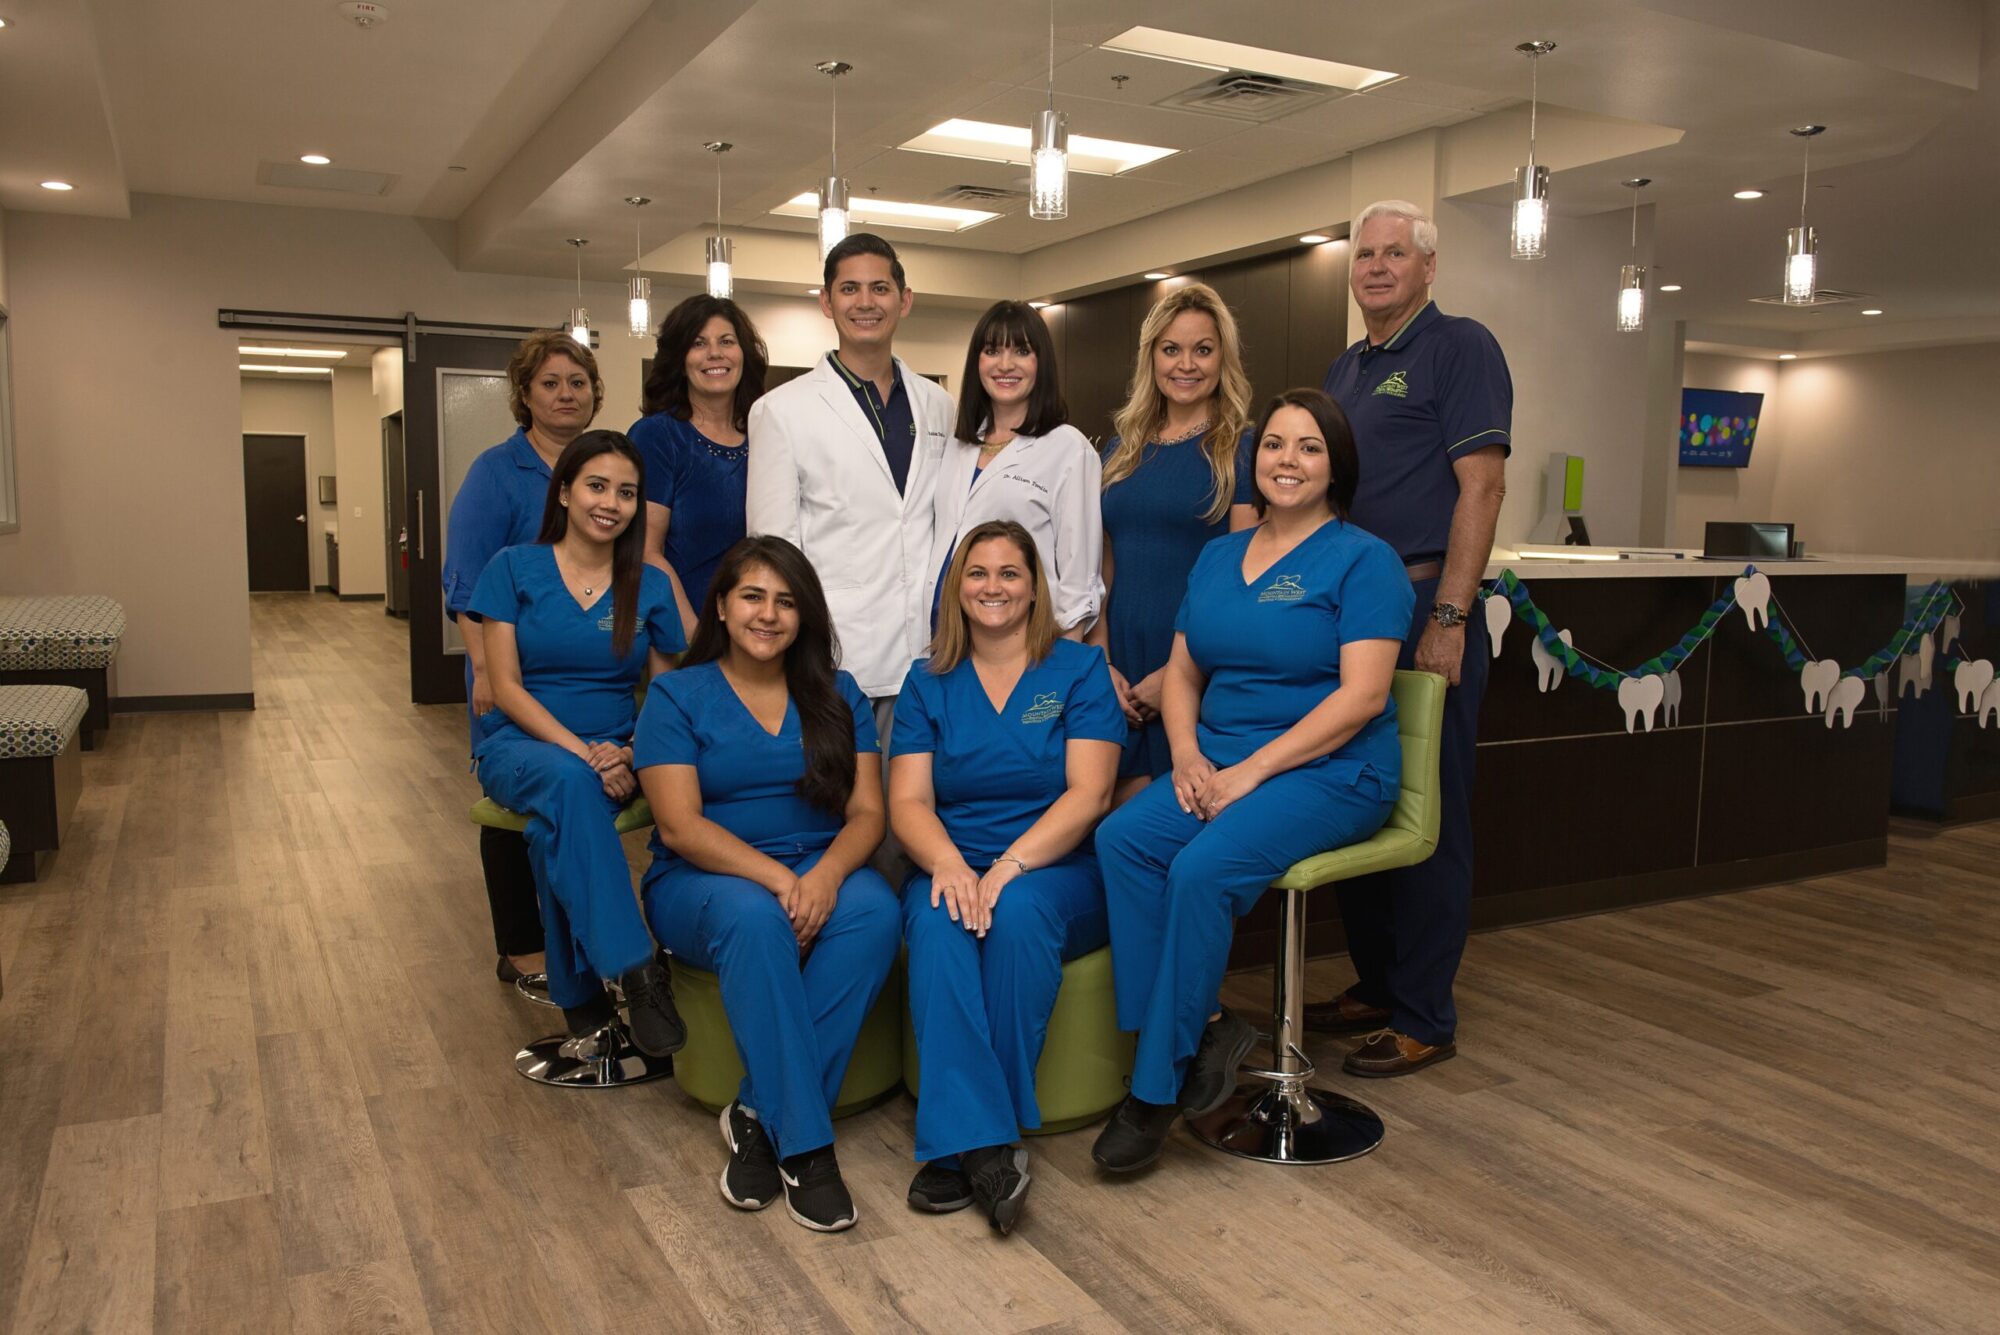 Mountain West Dental Specialists from Mountain West Dental Specialists